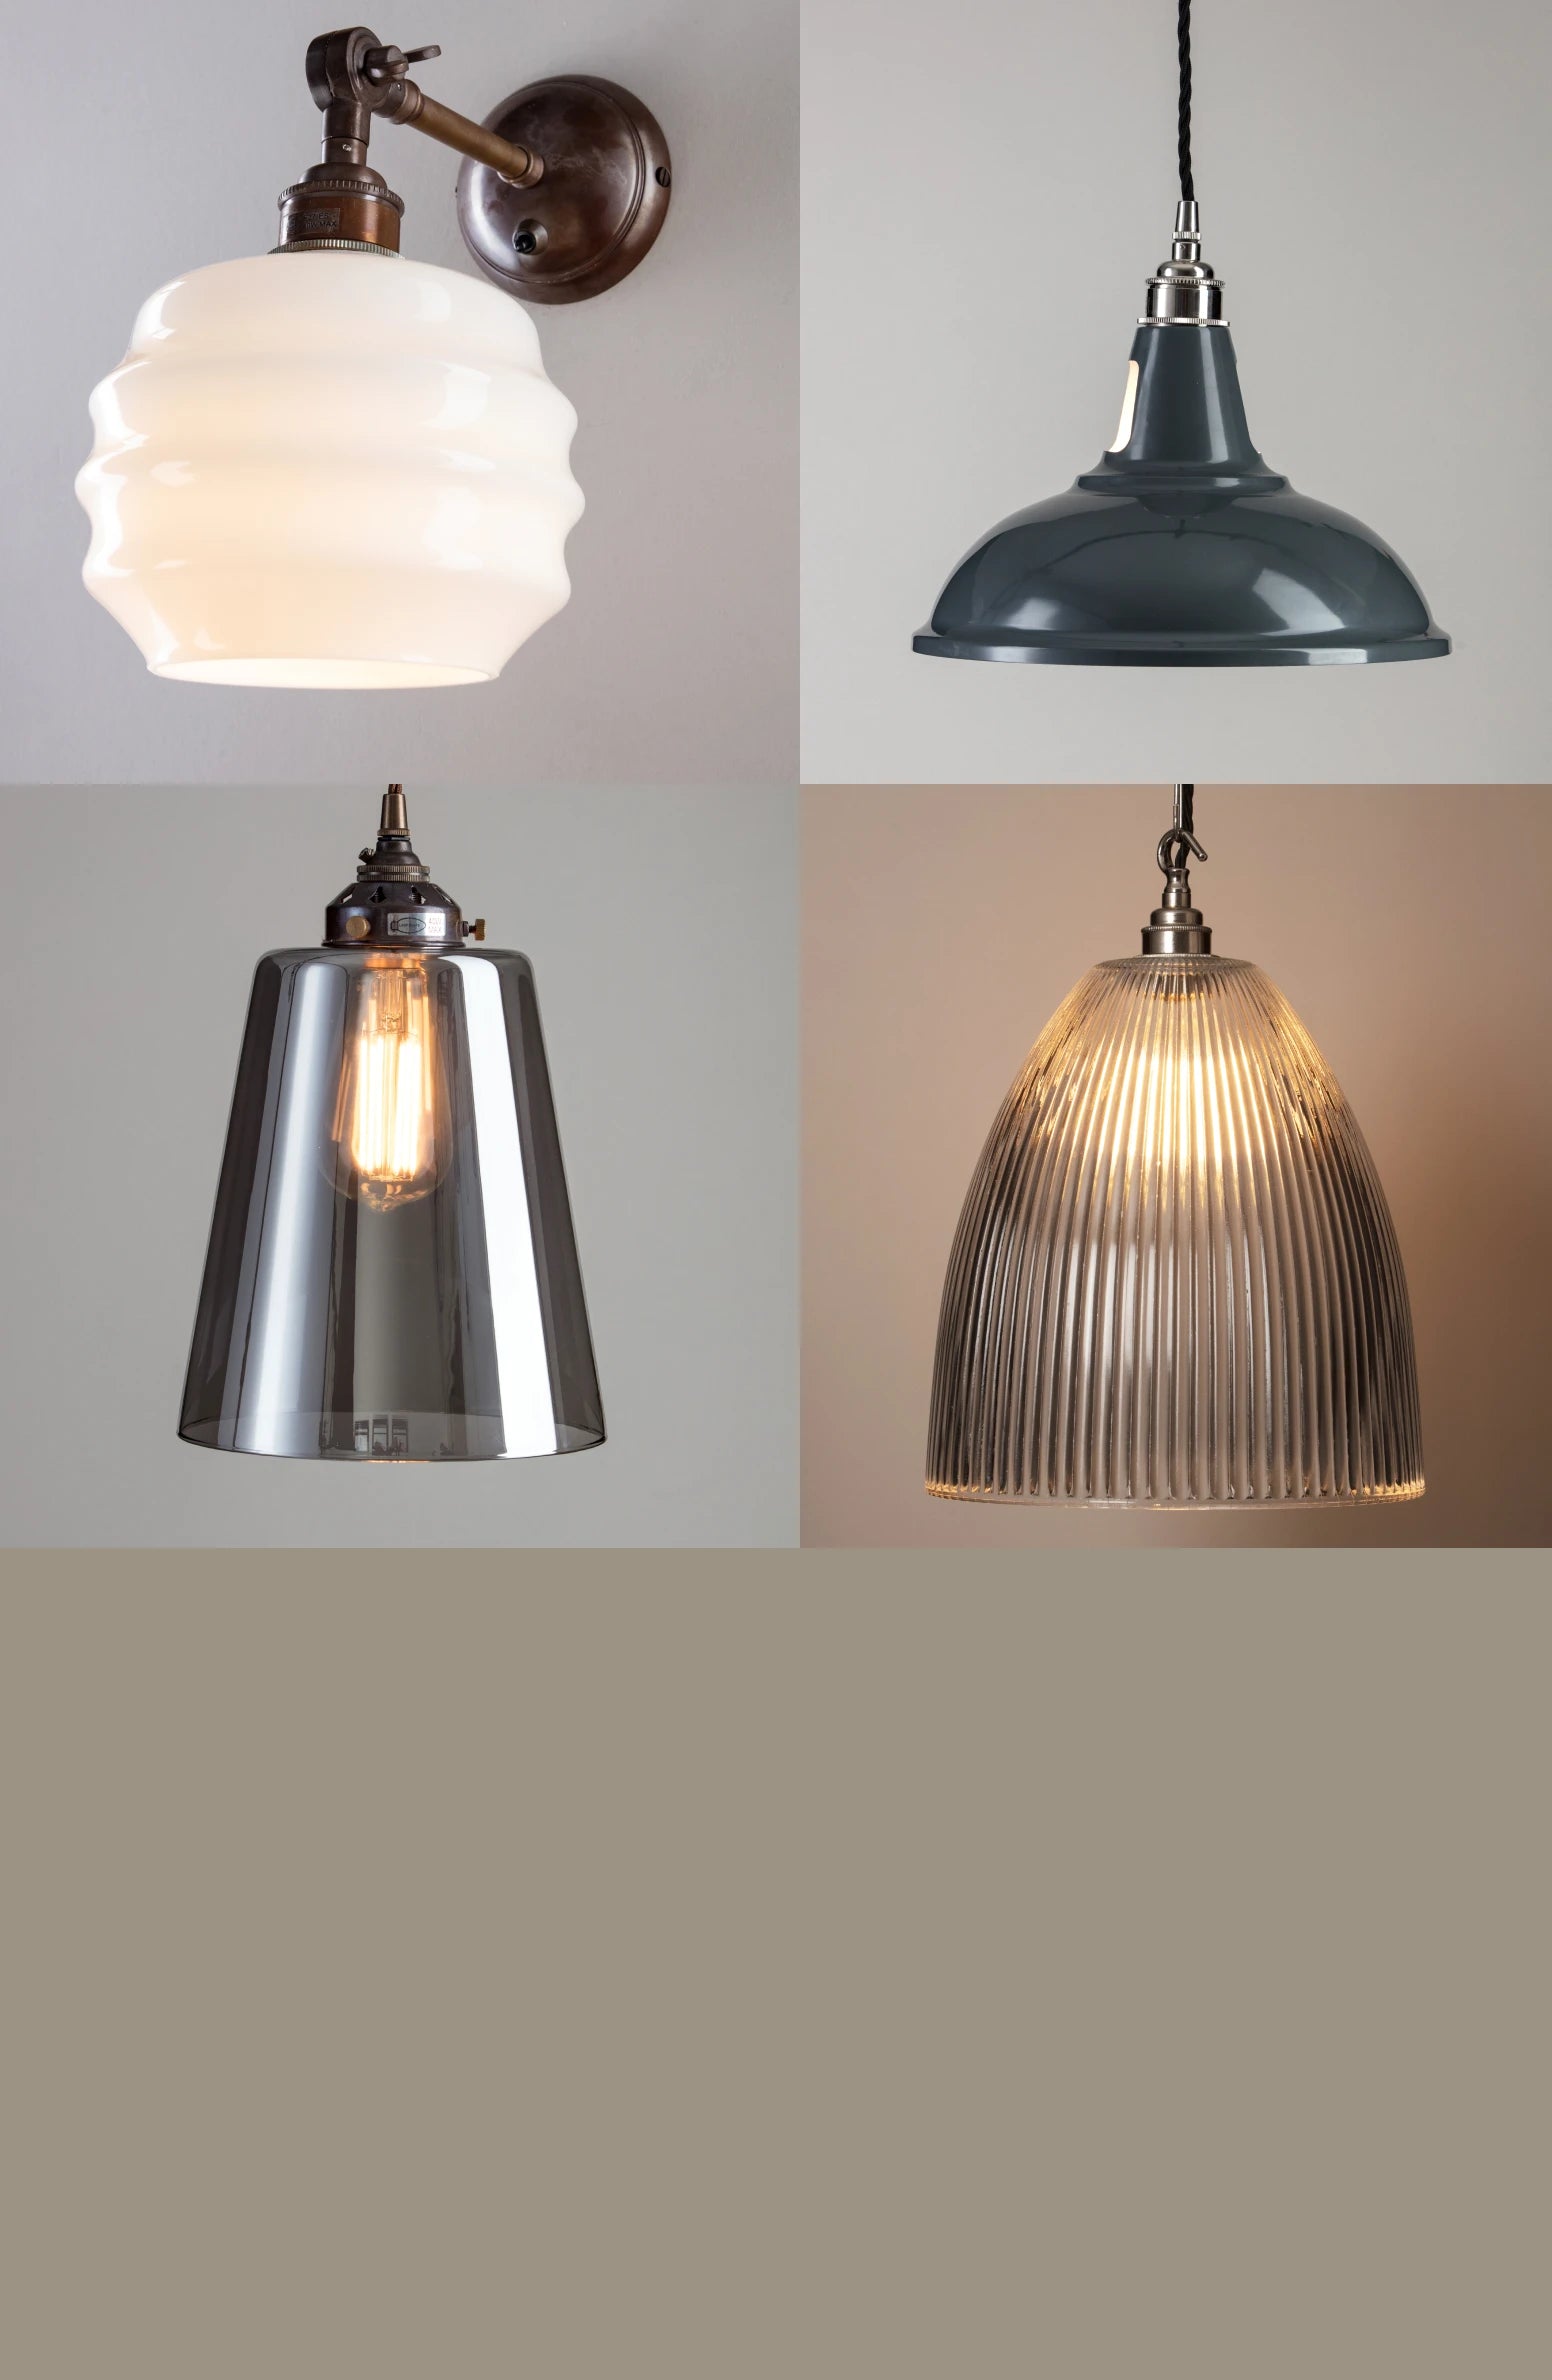 A collage of different types of lights.